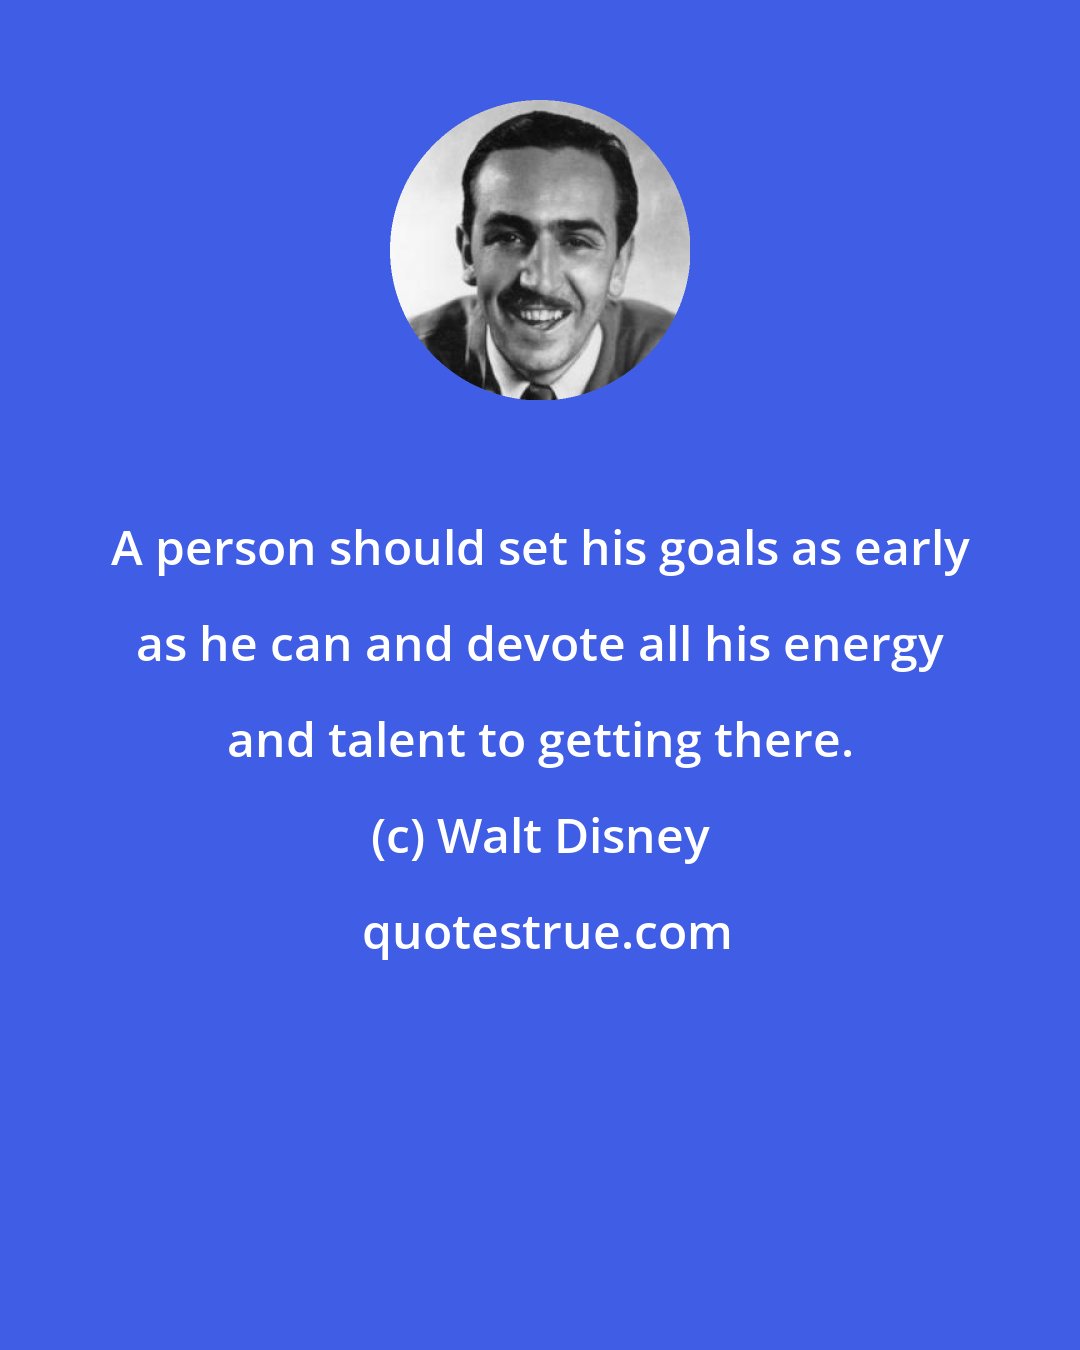 Walt Disney: A person should set his goals as early as he can and devote all his energy and talent to getting there.